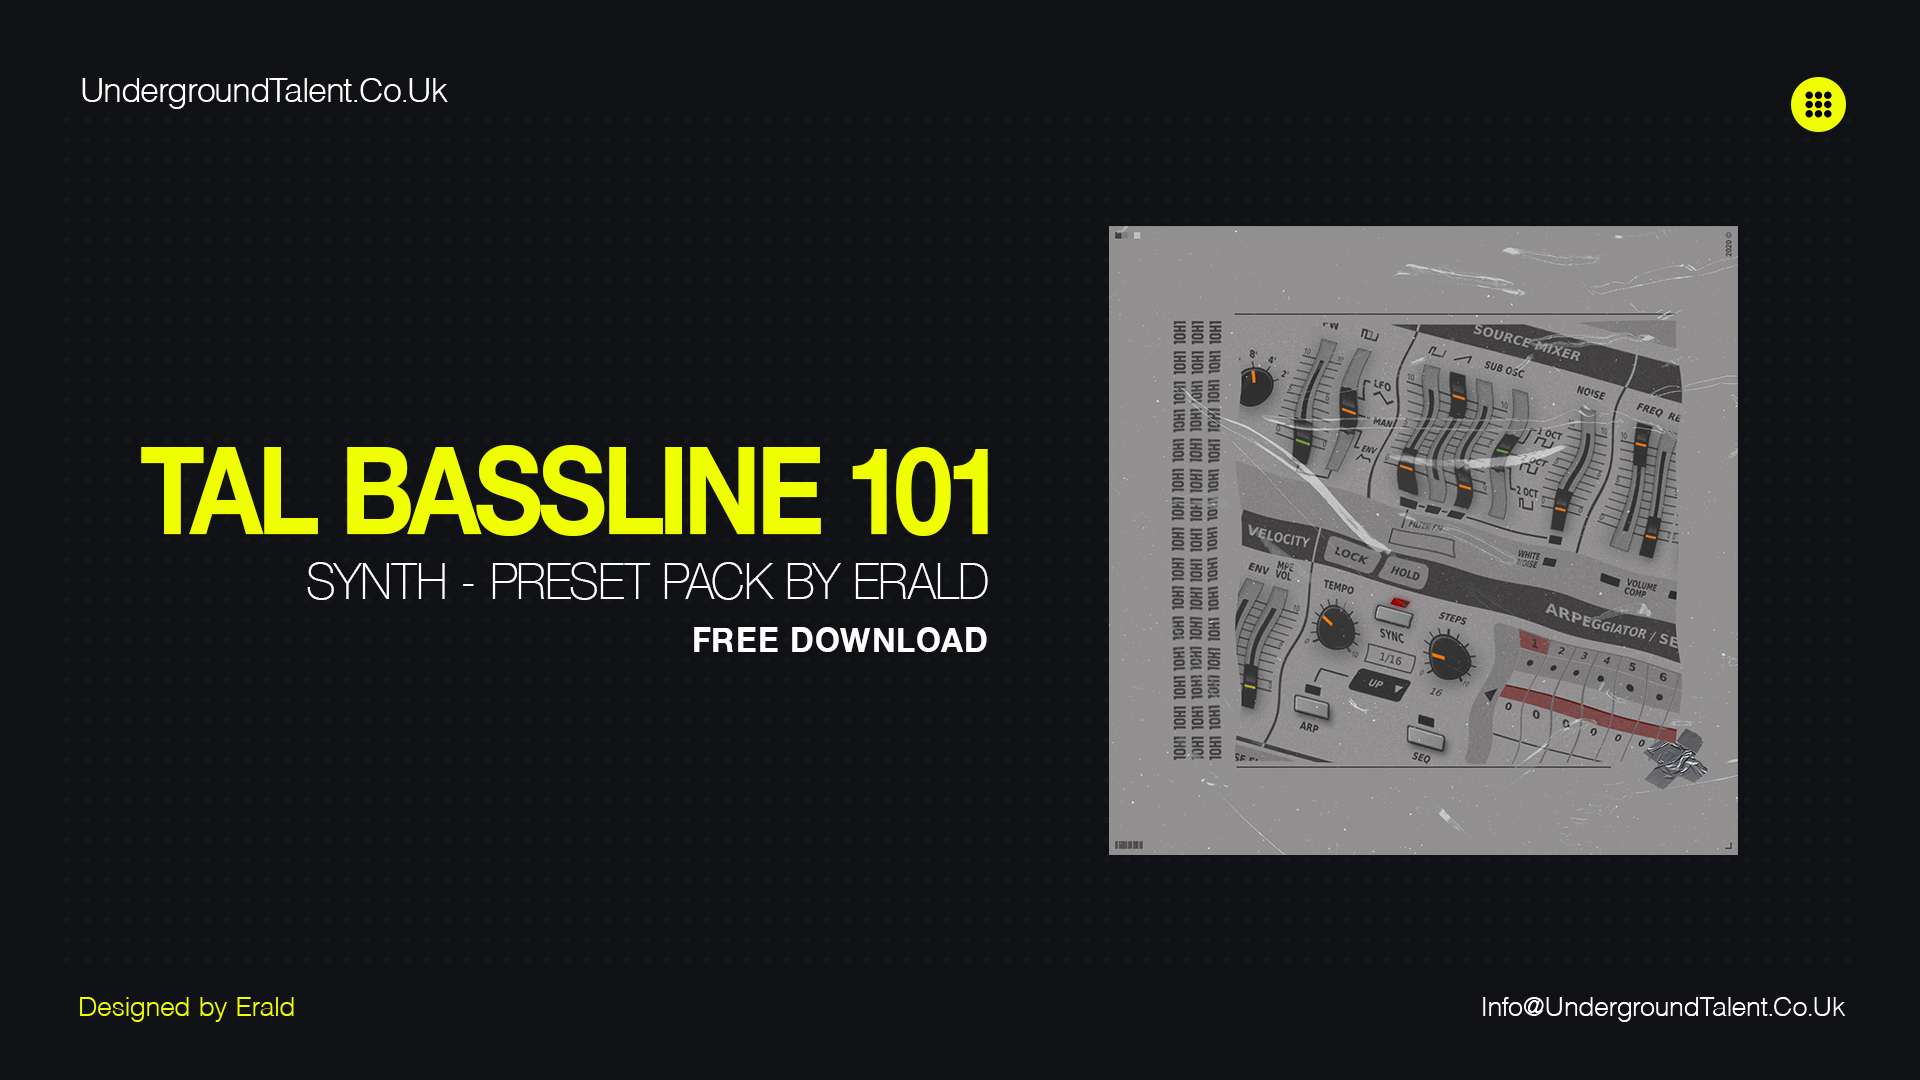 TAL Bassline 101 Synth – Preset Pack by Erald